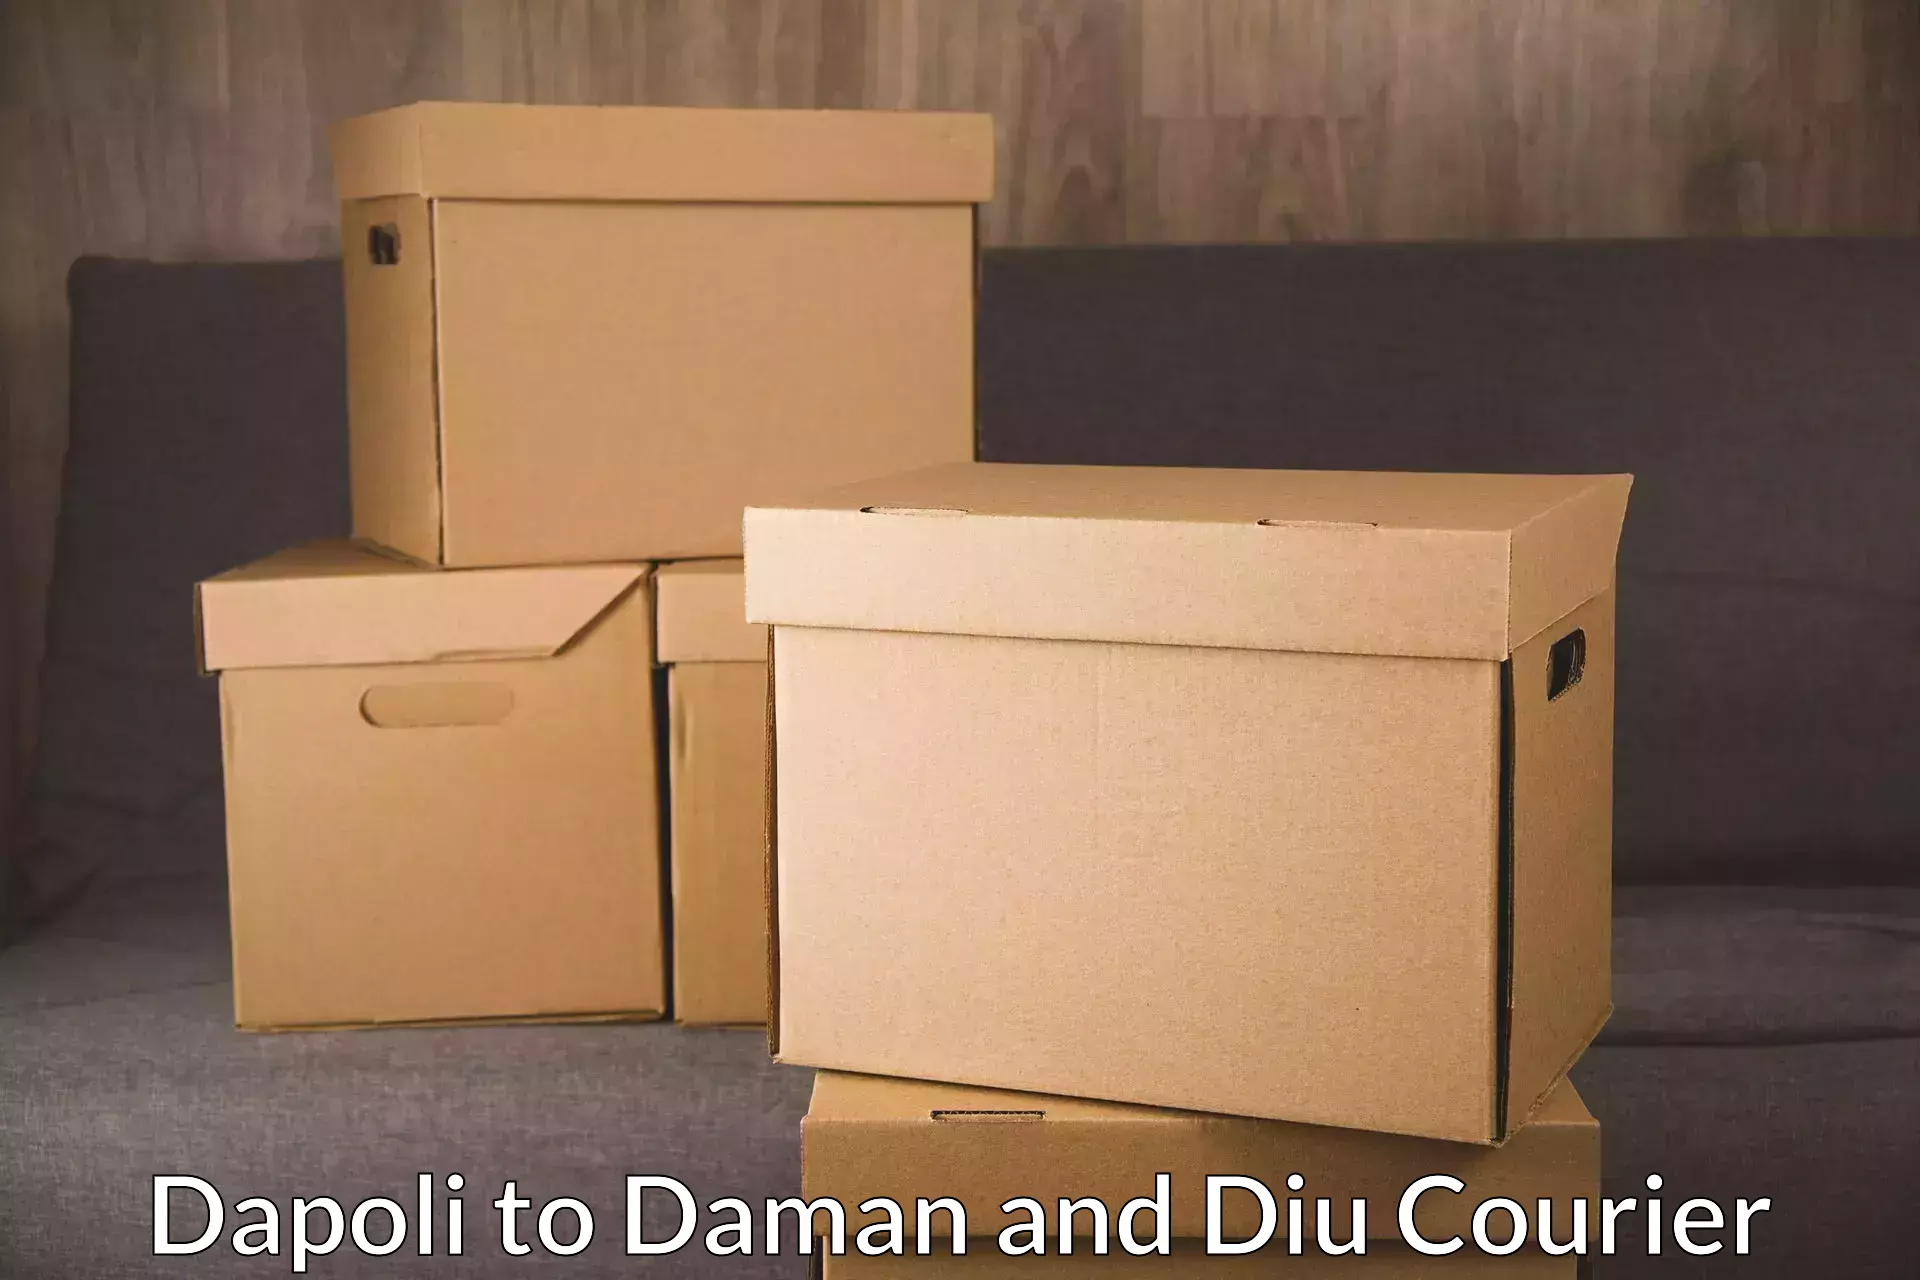 Business delivery service Dapoli to Daman and Diu